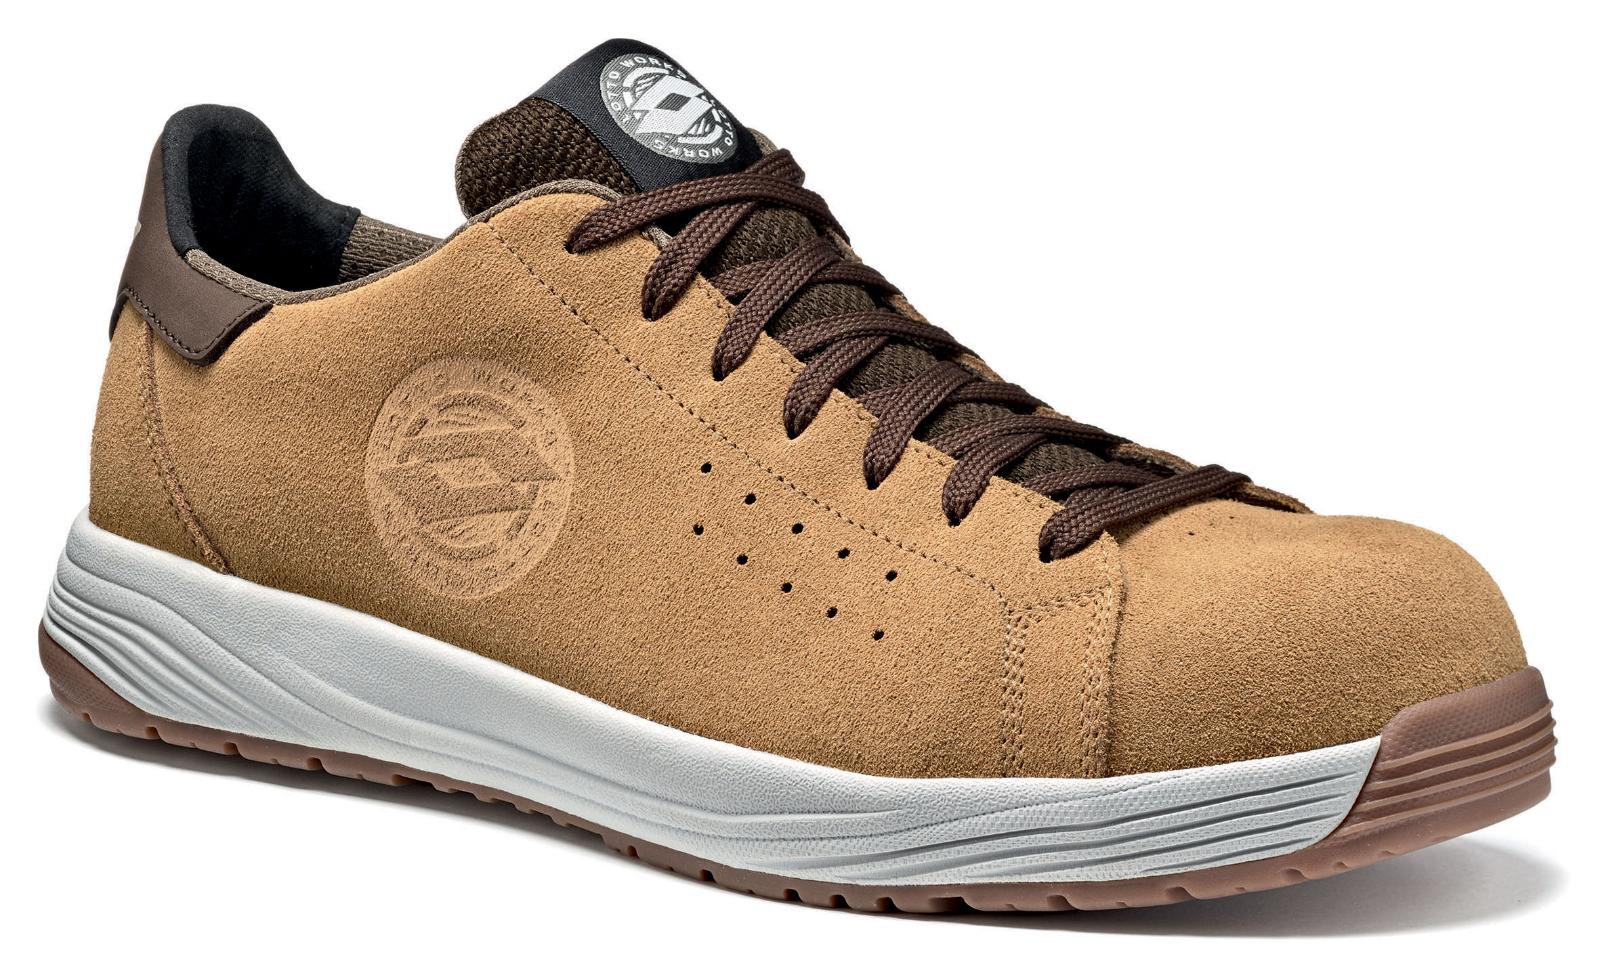 Chaussure securite basse Skate Camel Lotto Works Chaussures-pro.fr